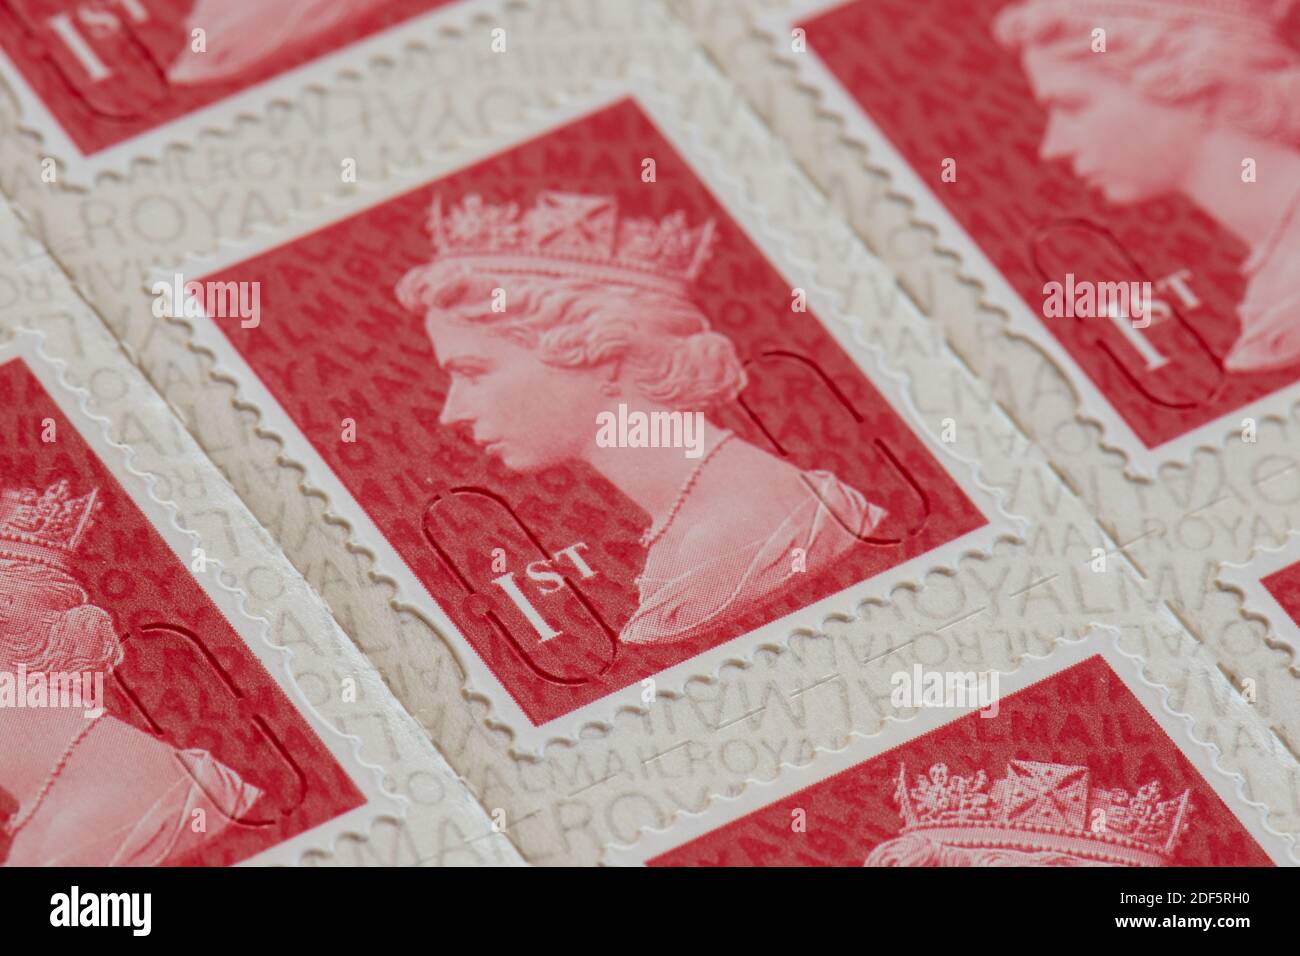 First Class stamp - UK Stock Photo